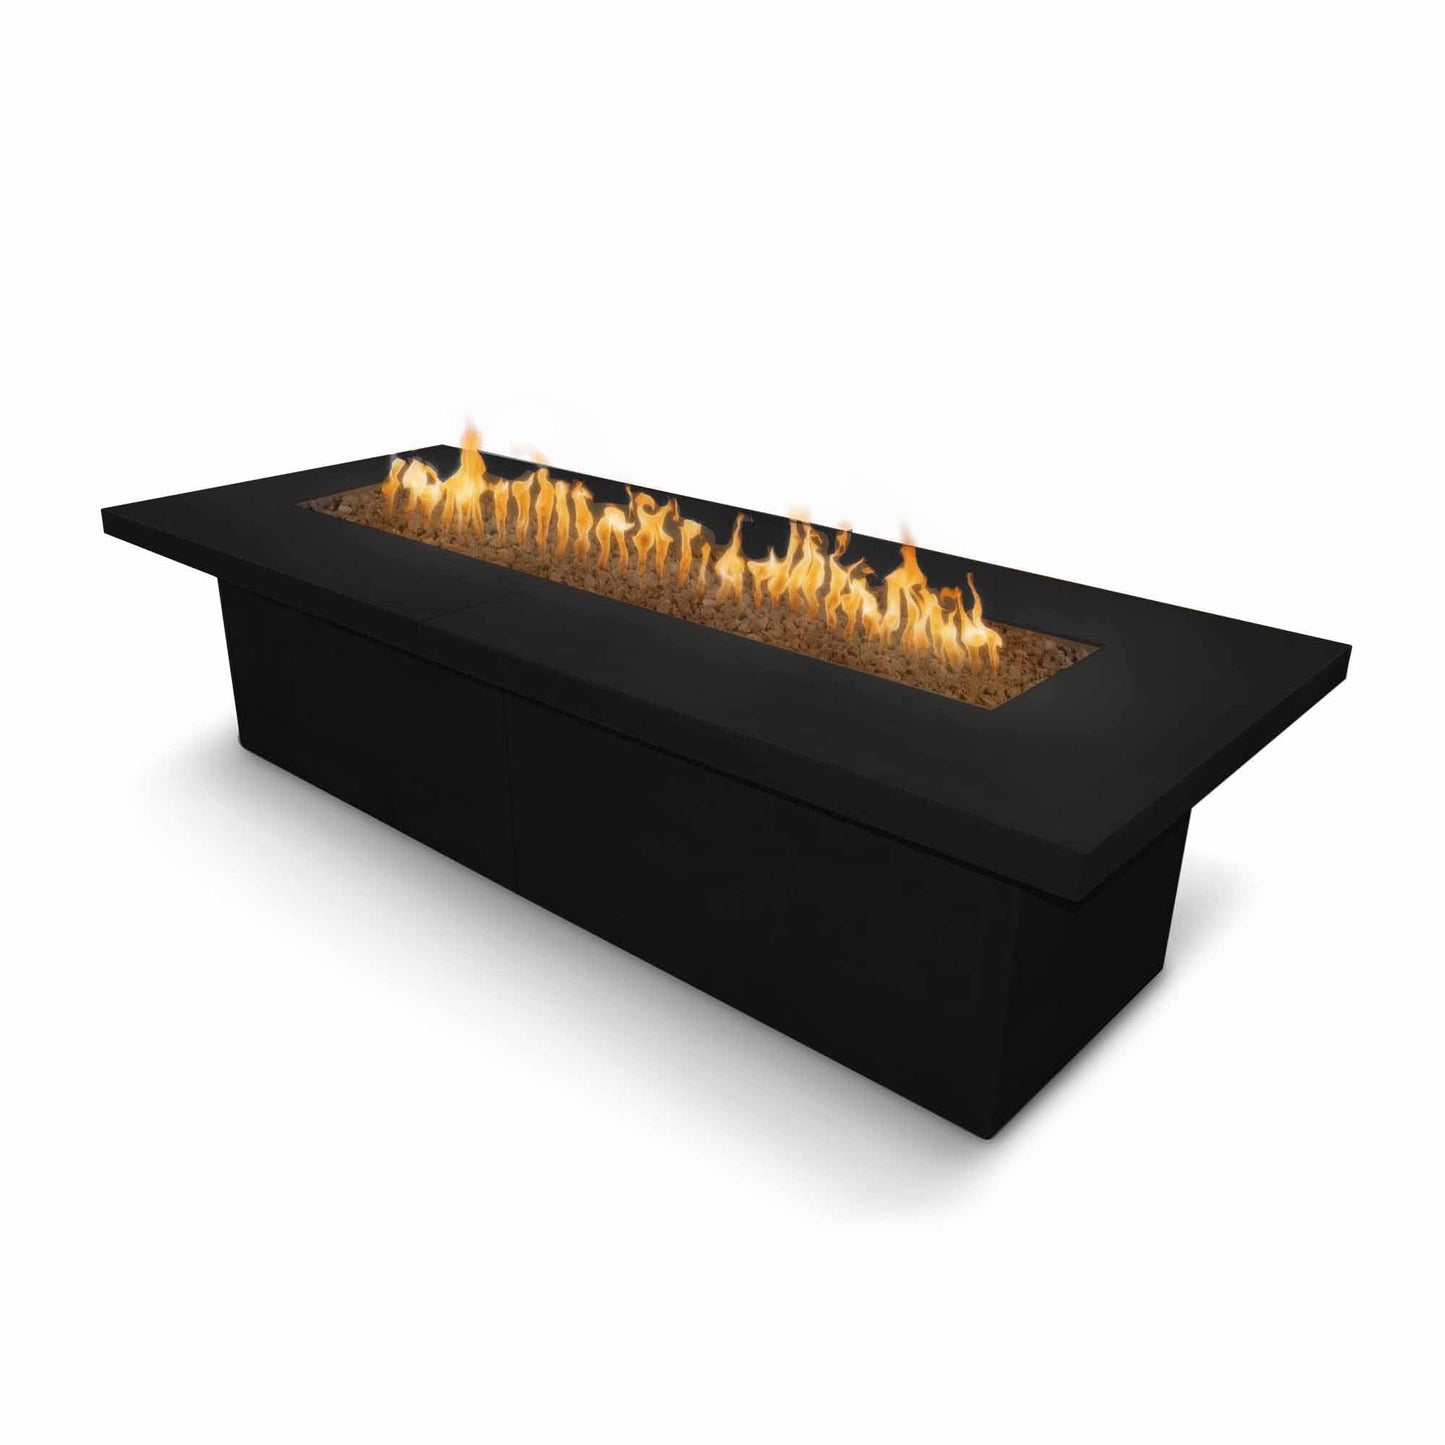 The Outdoor Plus Rectangular Newport 120" Java Powder Coated Metal Liquid Propane Fire Pit with Match Lit with Flame Sense Ignition